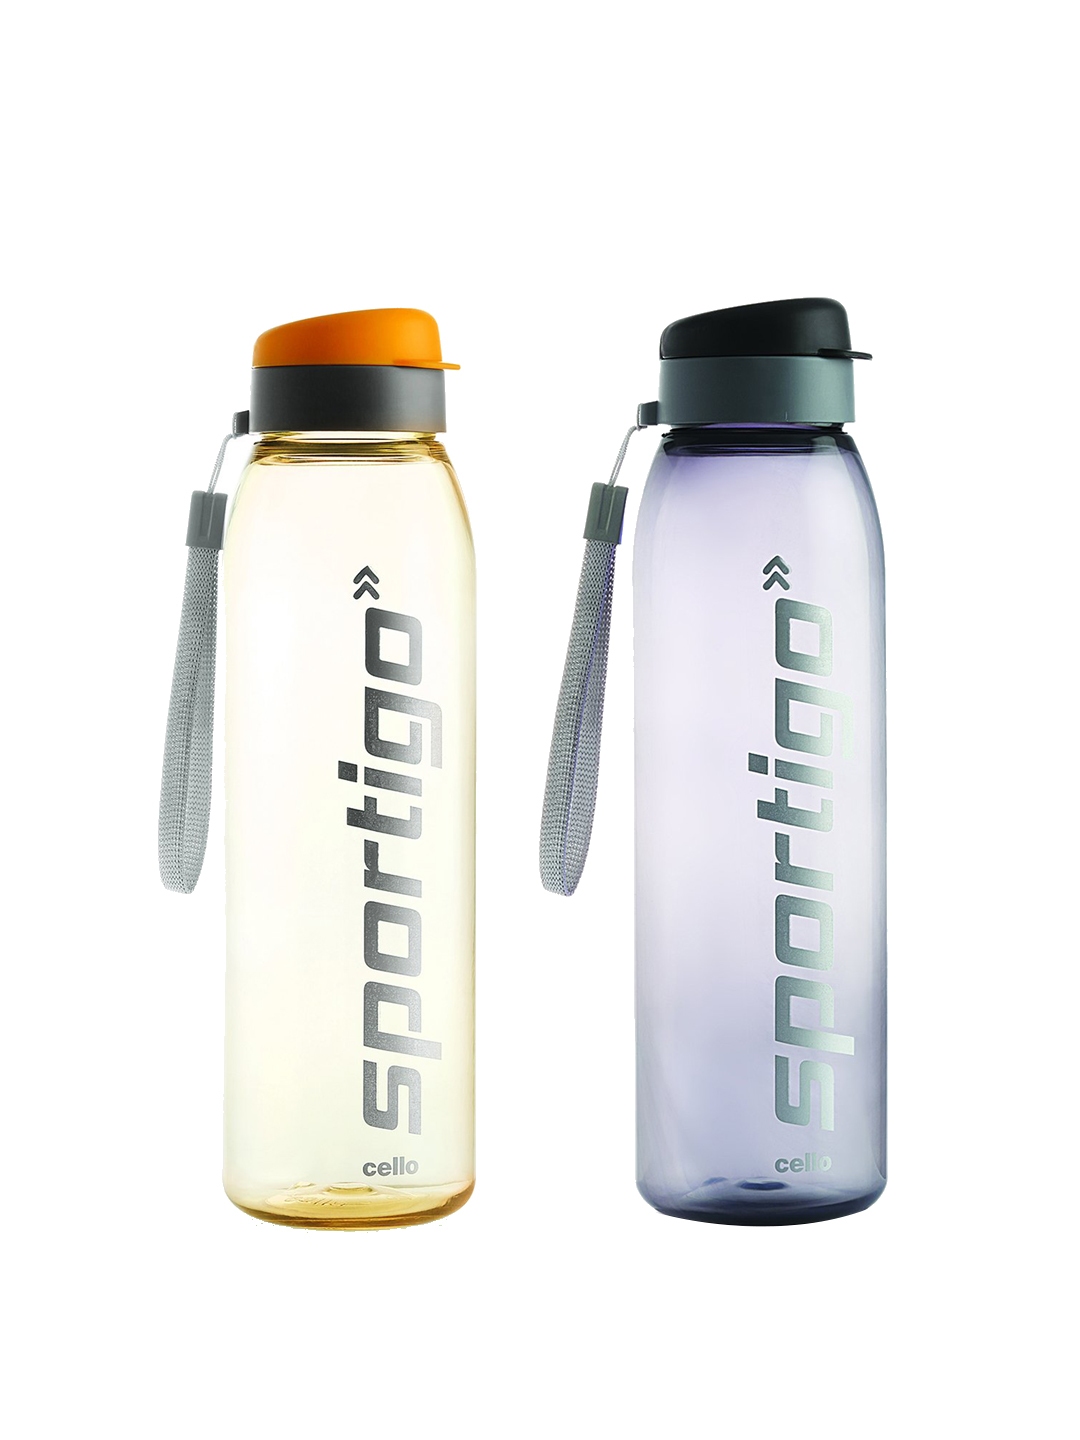 Cello Puro Plastic Sports Insulated Water Bottle,Set of 4, Assorted (600 ML)